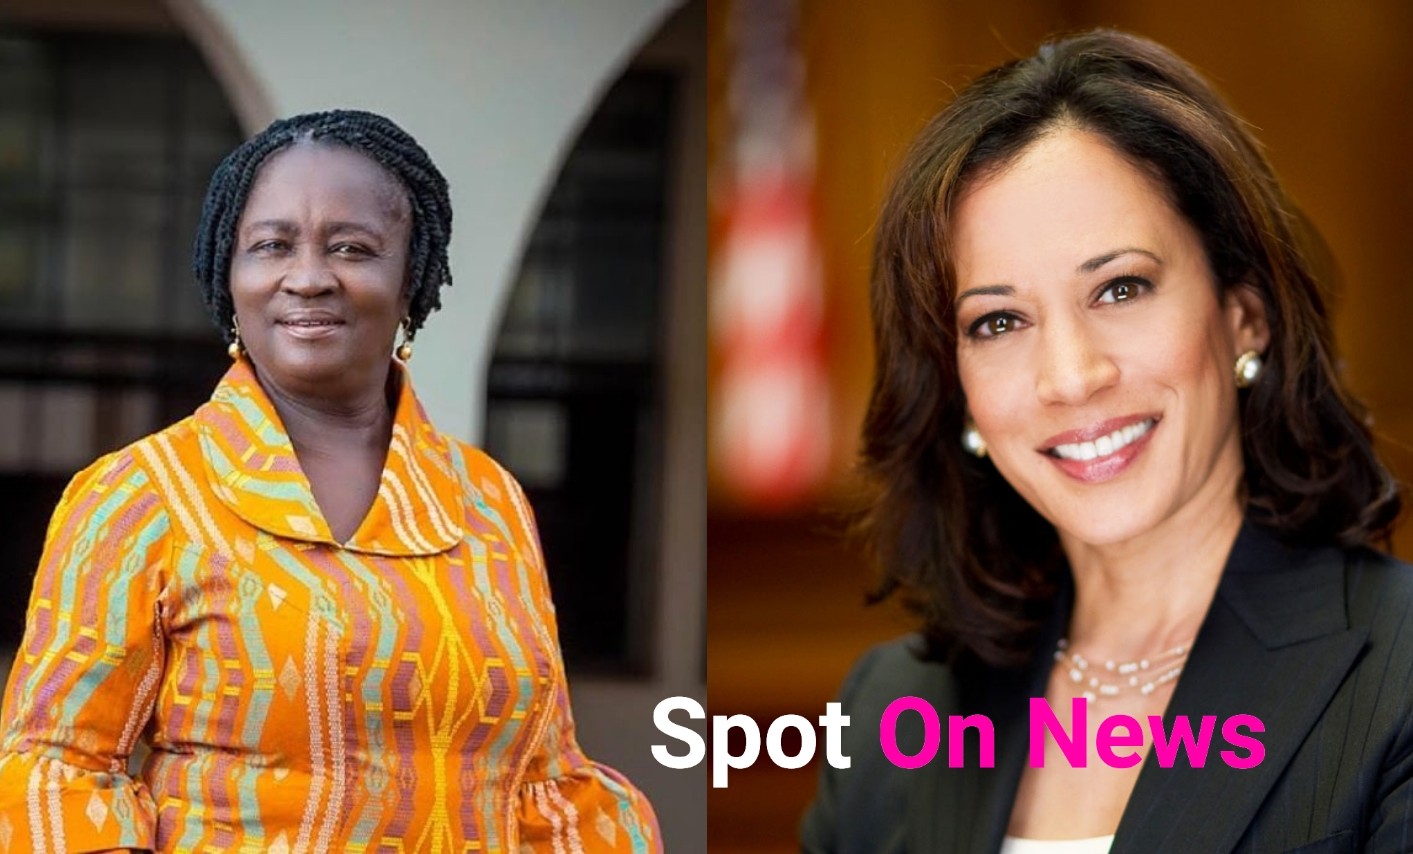 Ghana women must be ambitious and be motivated by Kamala Harris' political  success---Naana Opoku-Agyemang